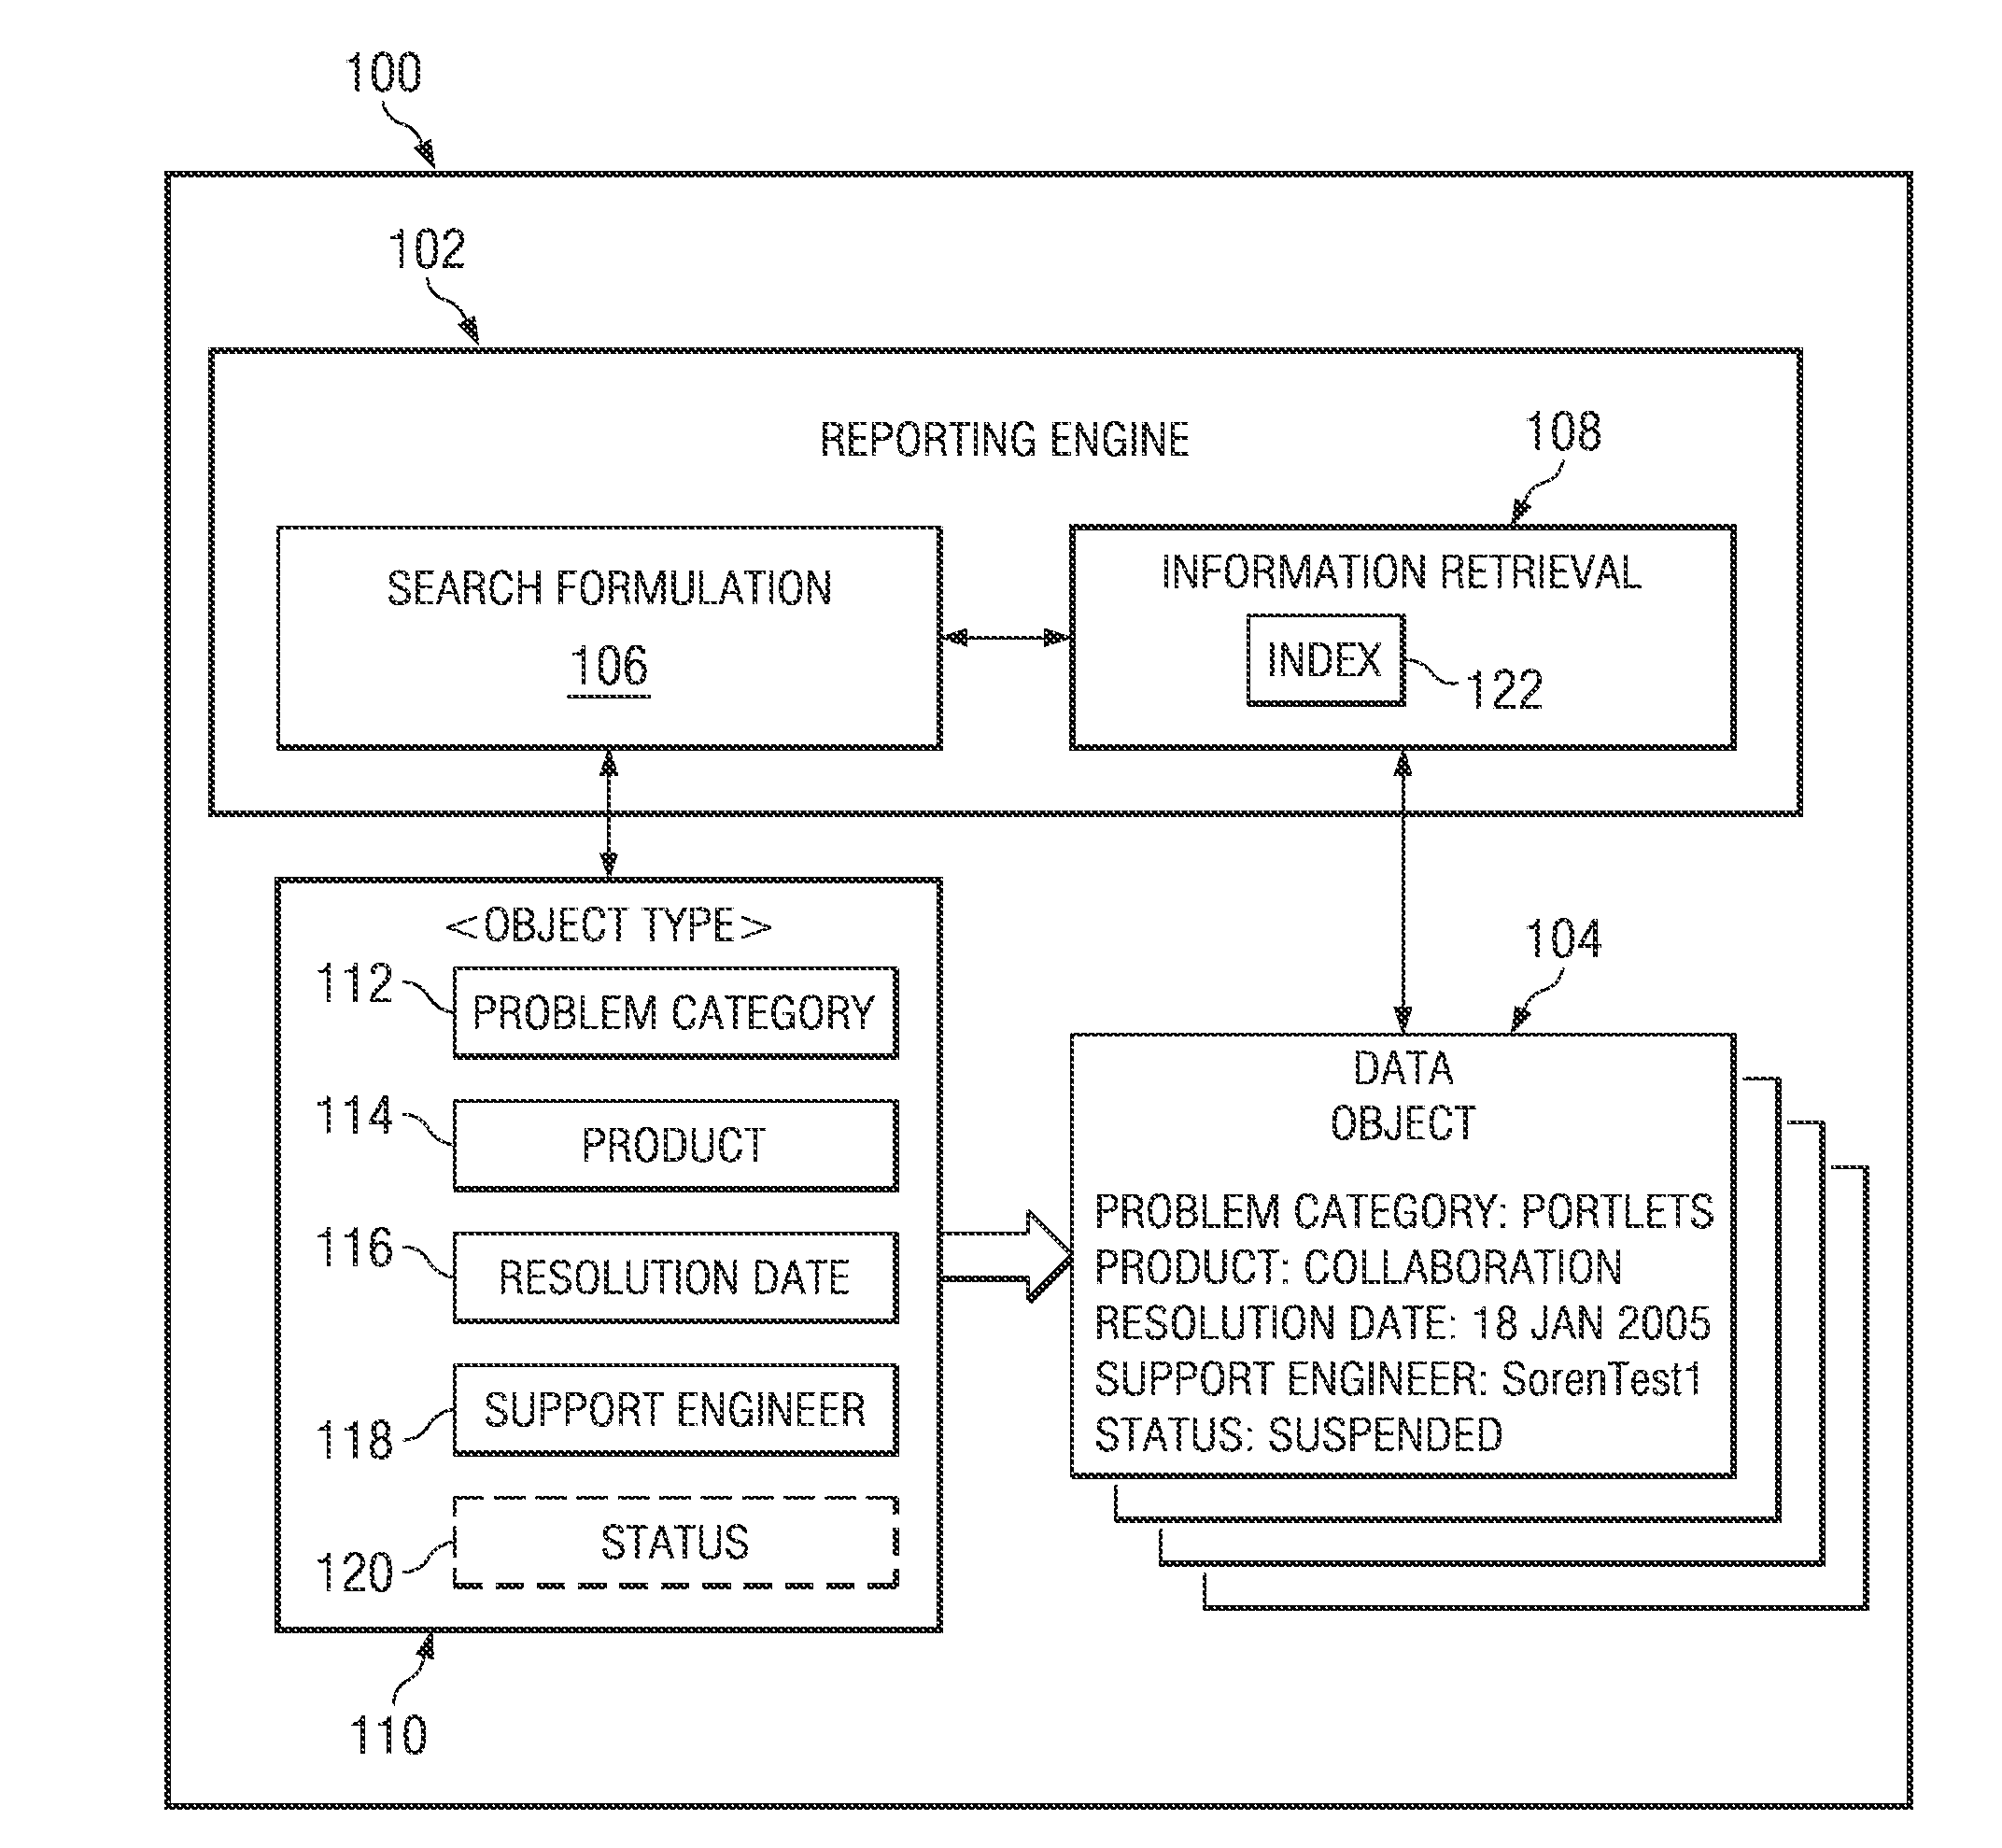 System and Method to Search and Generate Reports from Semi-Structured Data Including Dynamic Metadata